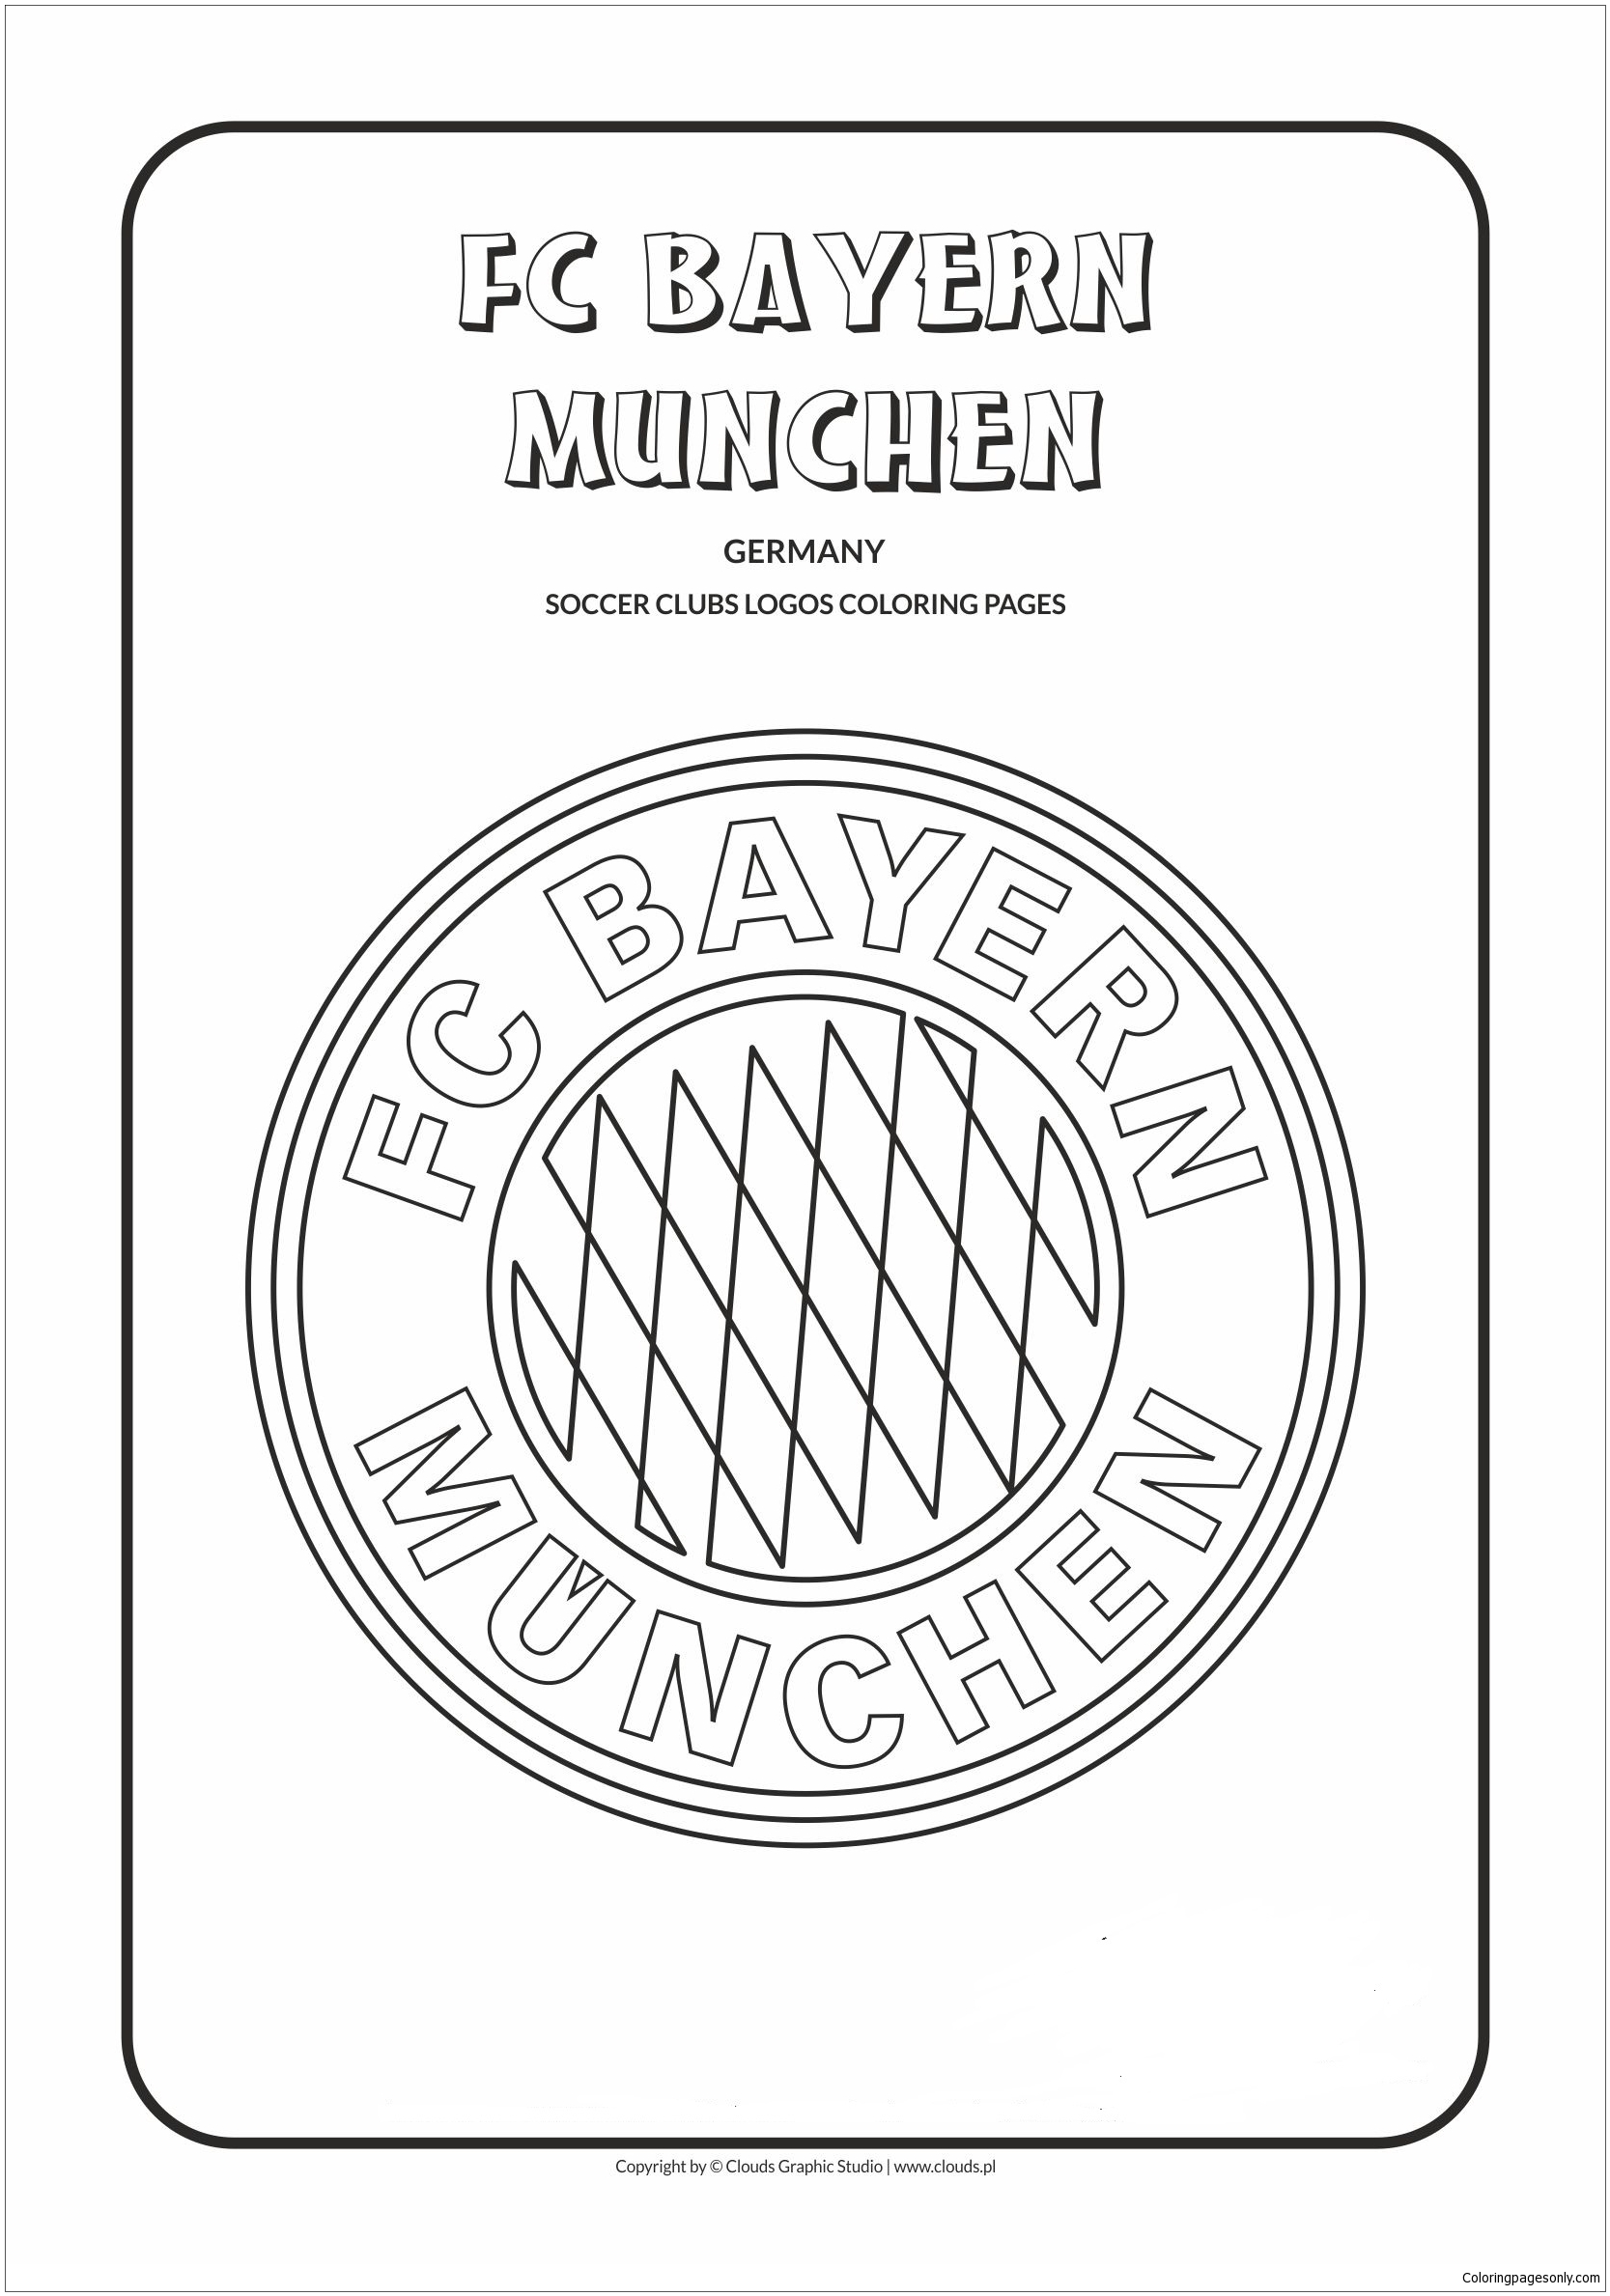 F.C Bayern Munchen Coloring Page